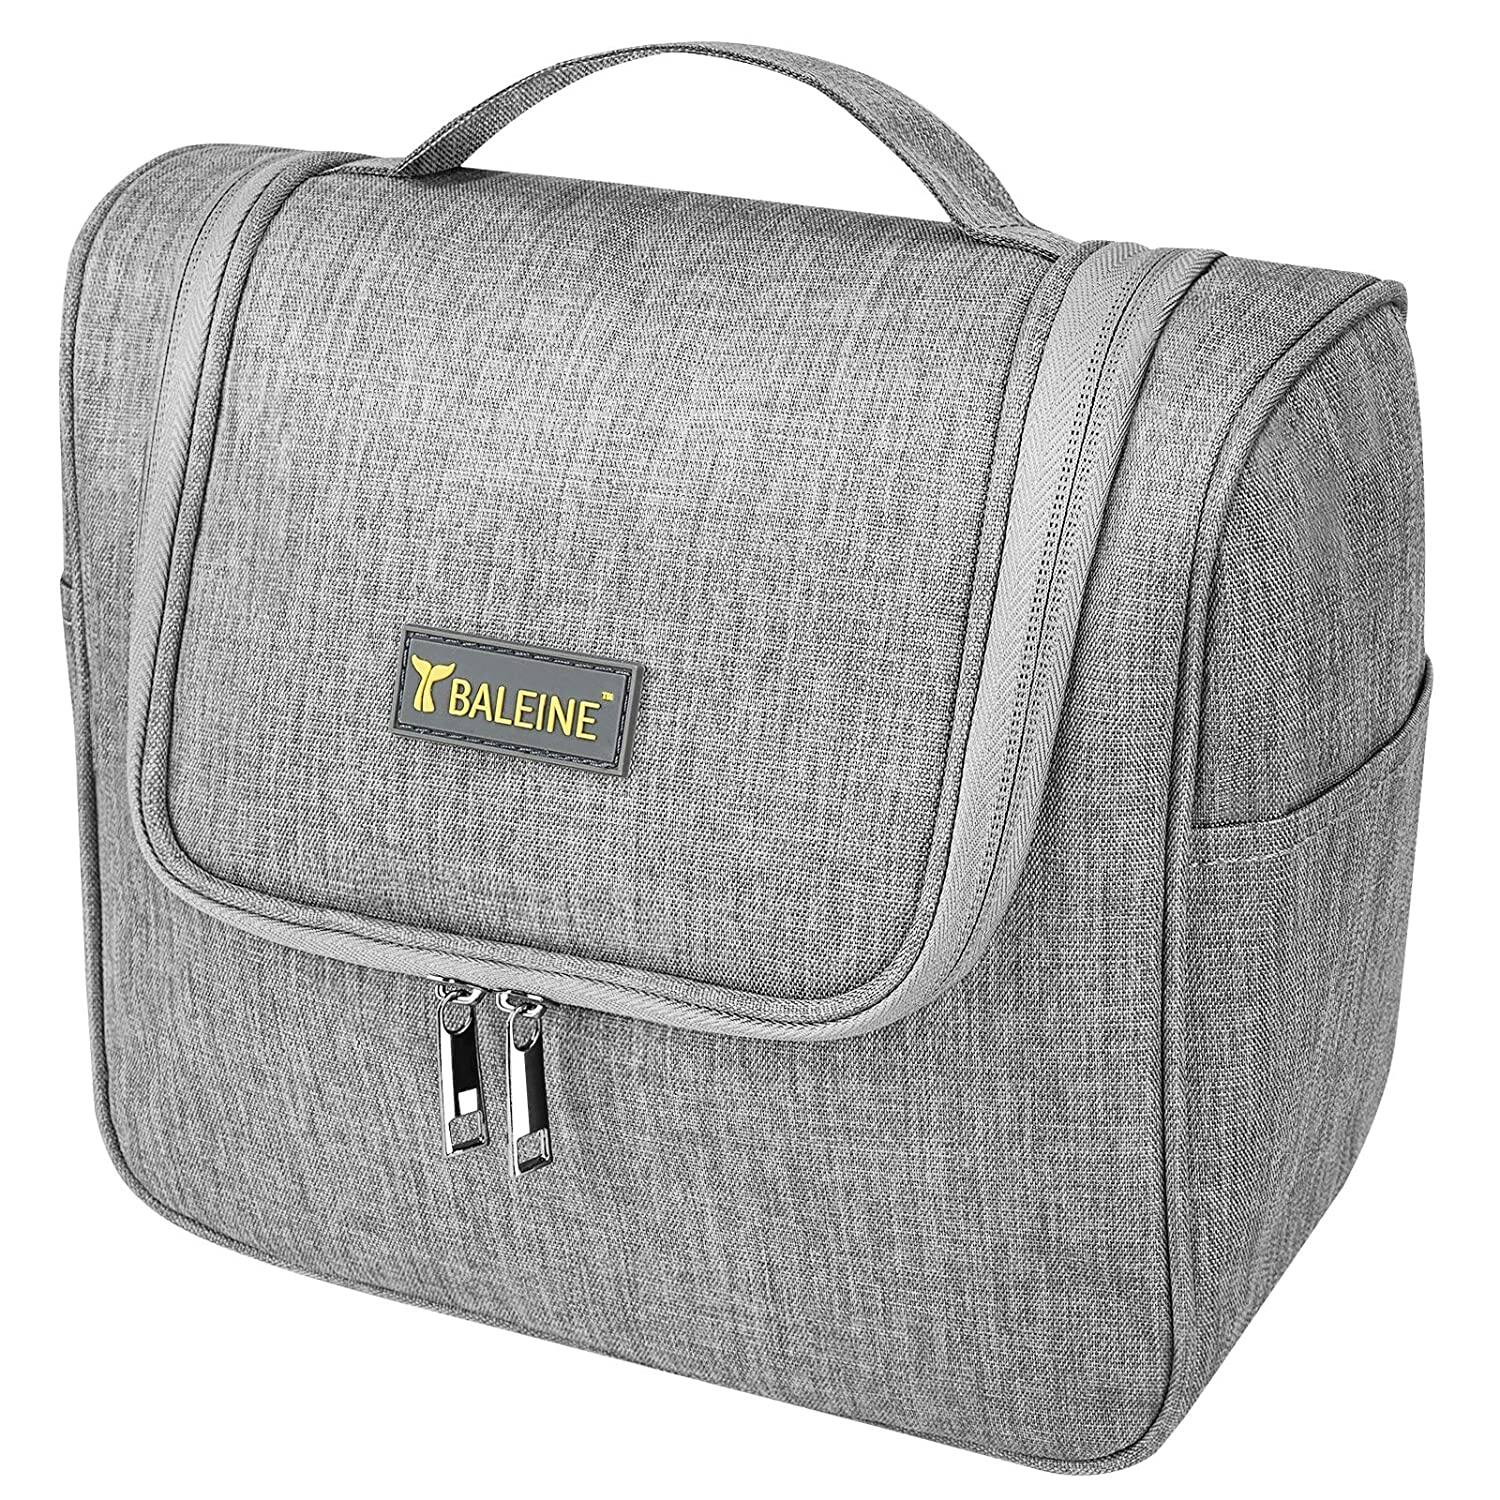 Toiletry Bag for Women and Men $8.99 + Free Shipping w/ Amazon Prime or Orders $25+